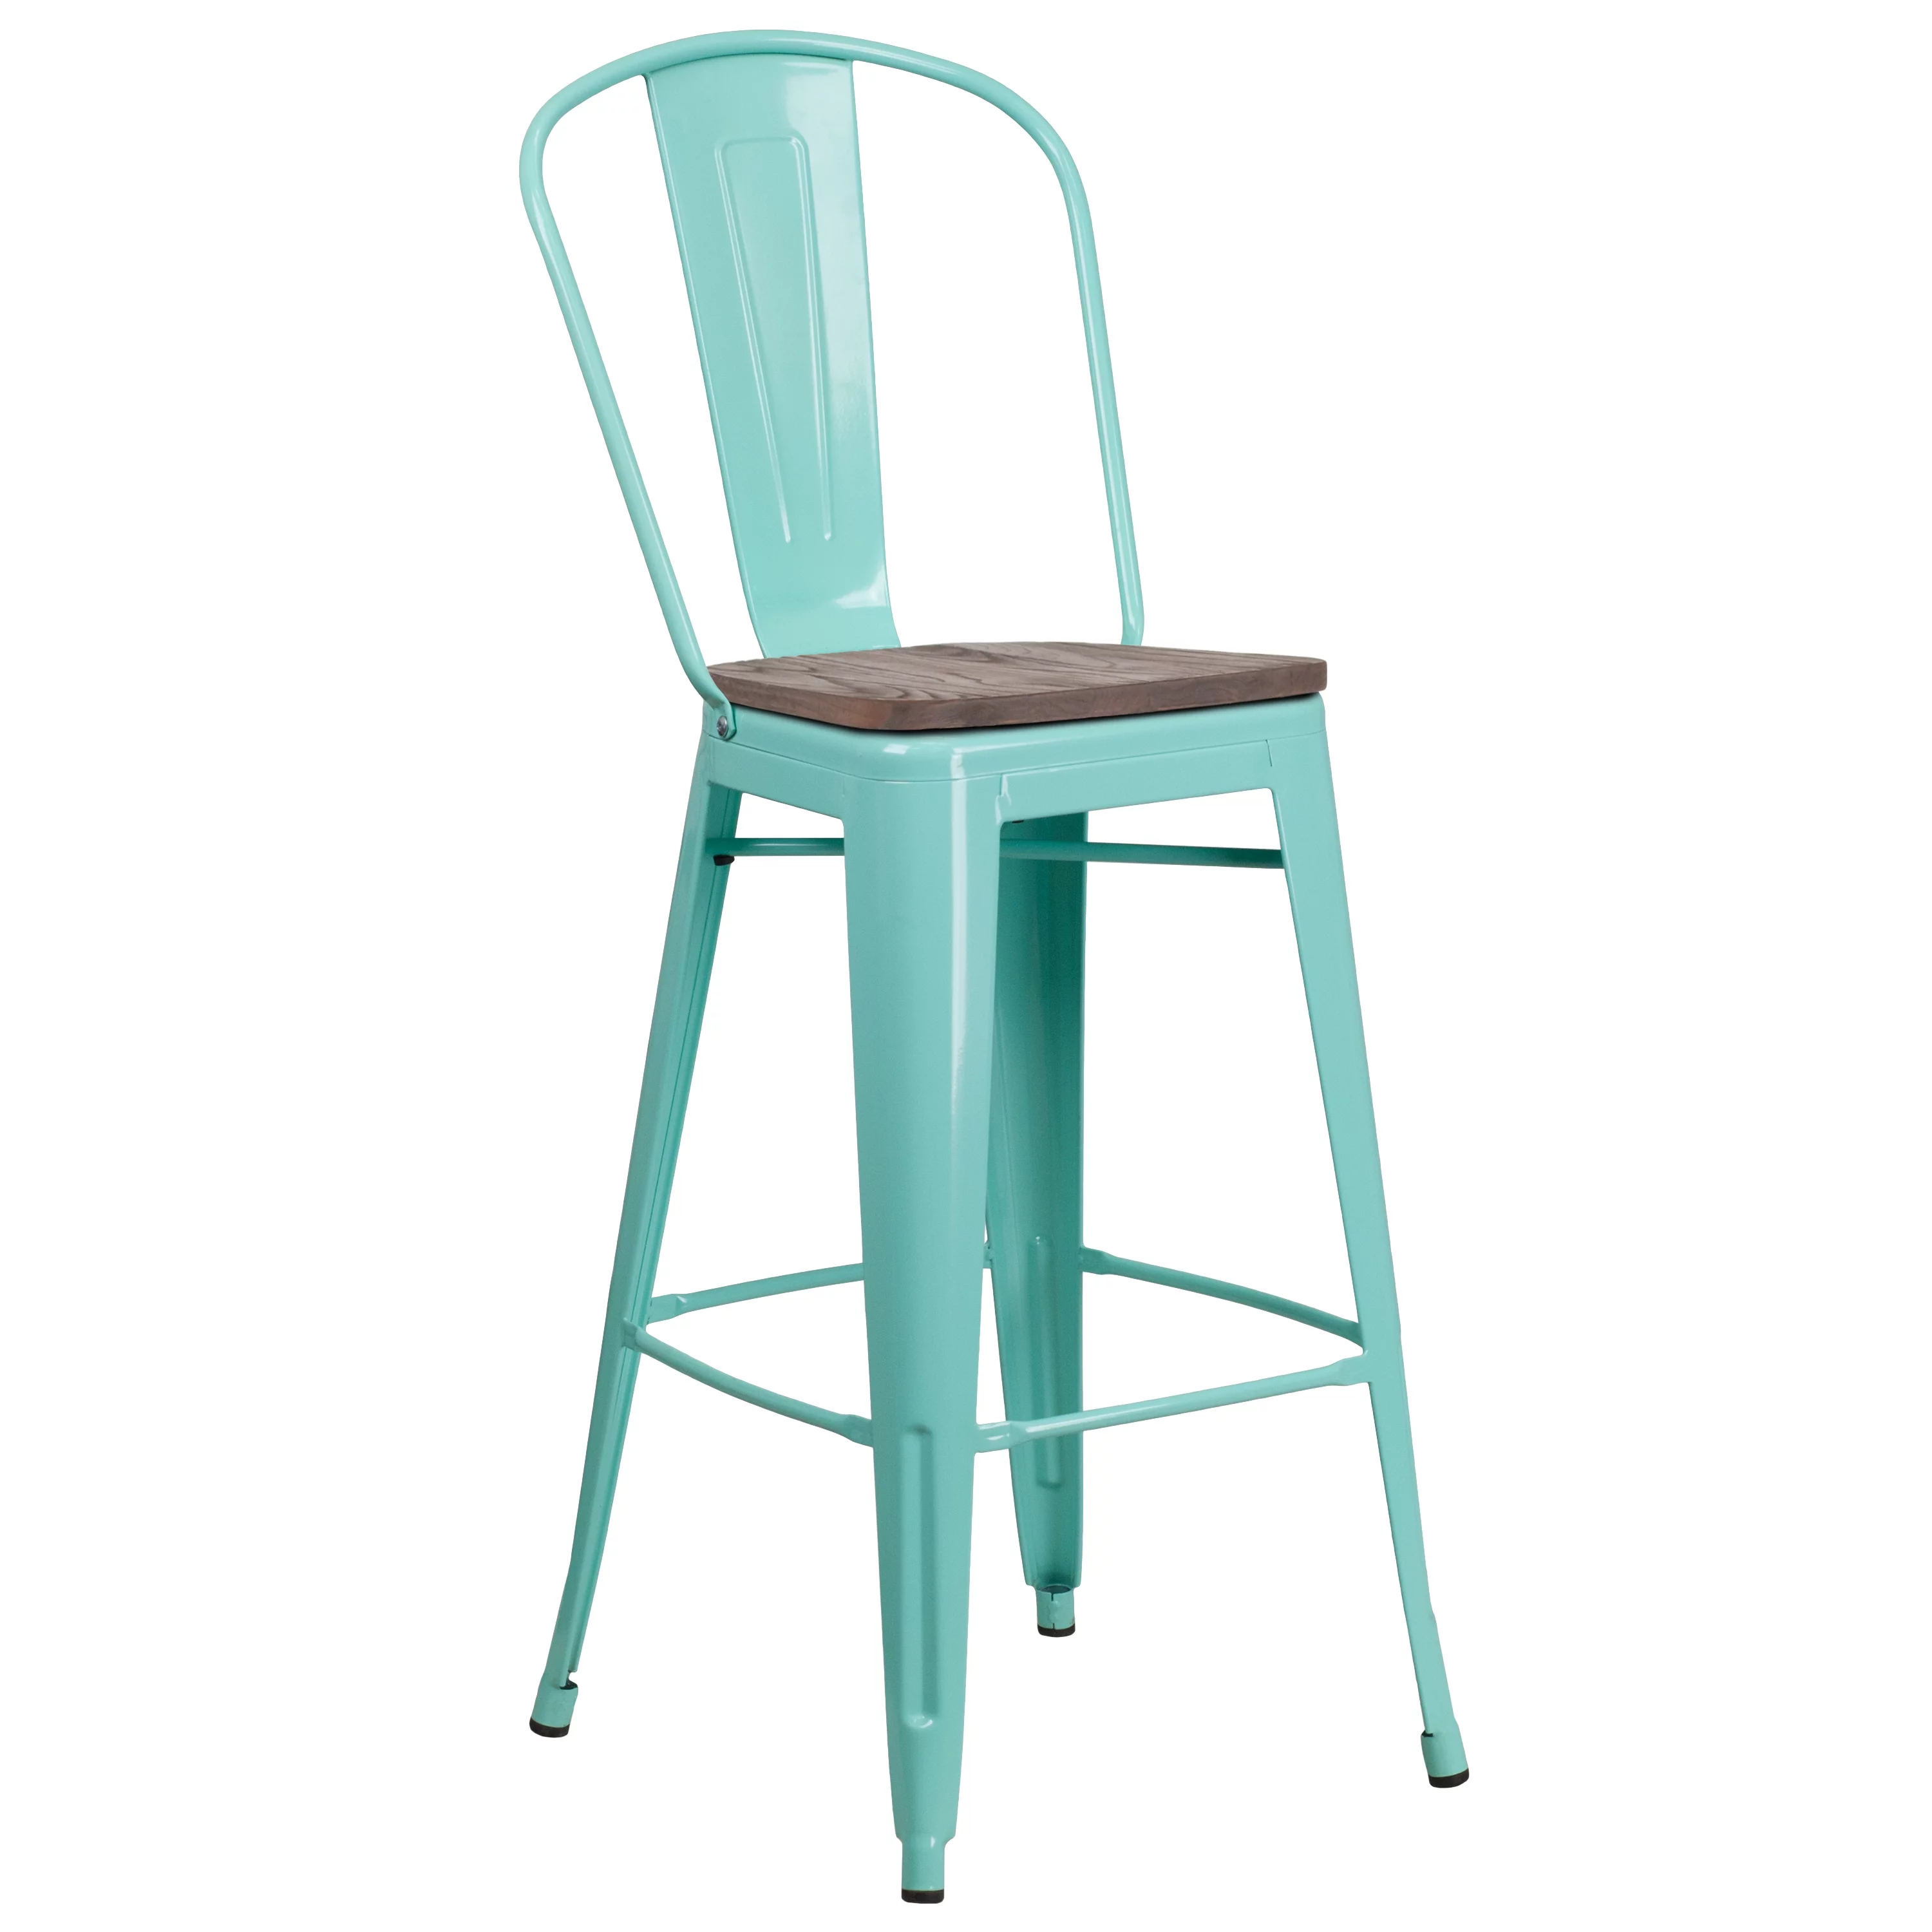 Flash Furniture Cindy 30" High Mint Green Metal Barstool with Back and Wood Seat